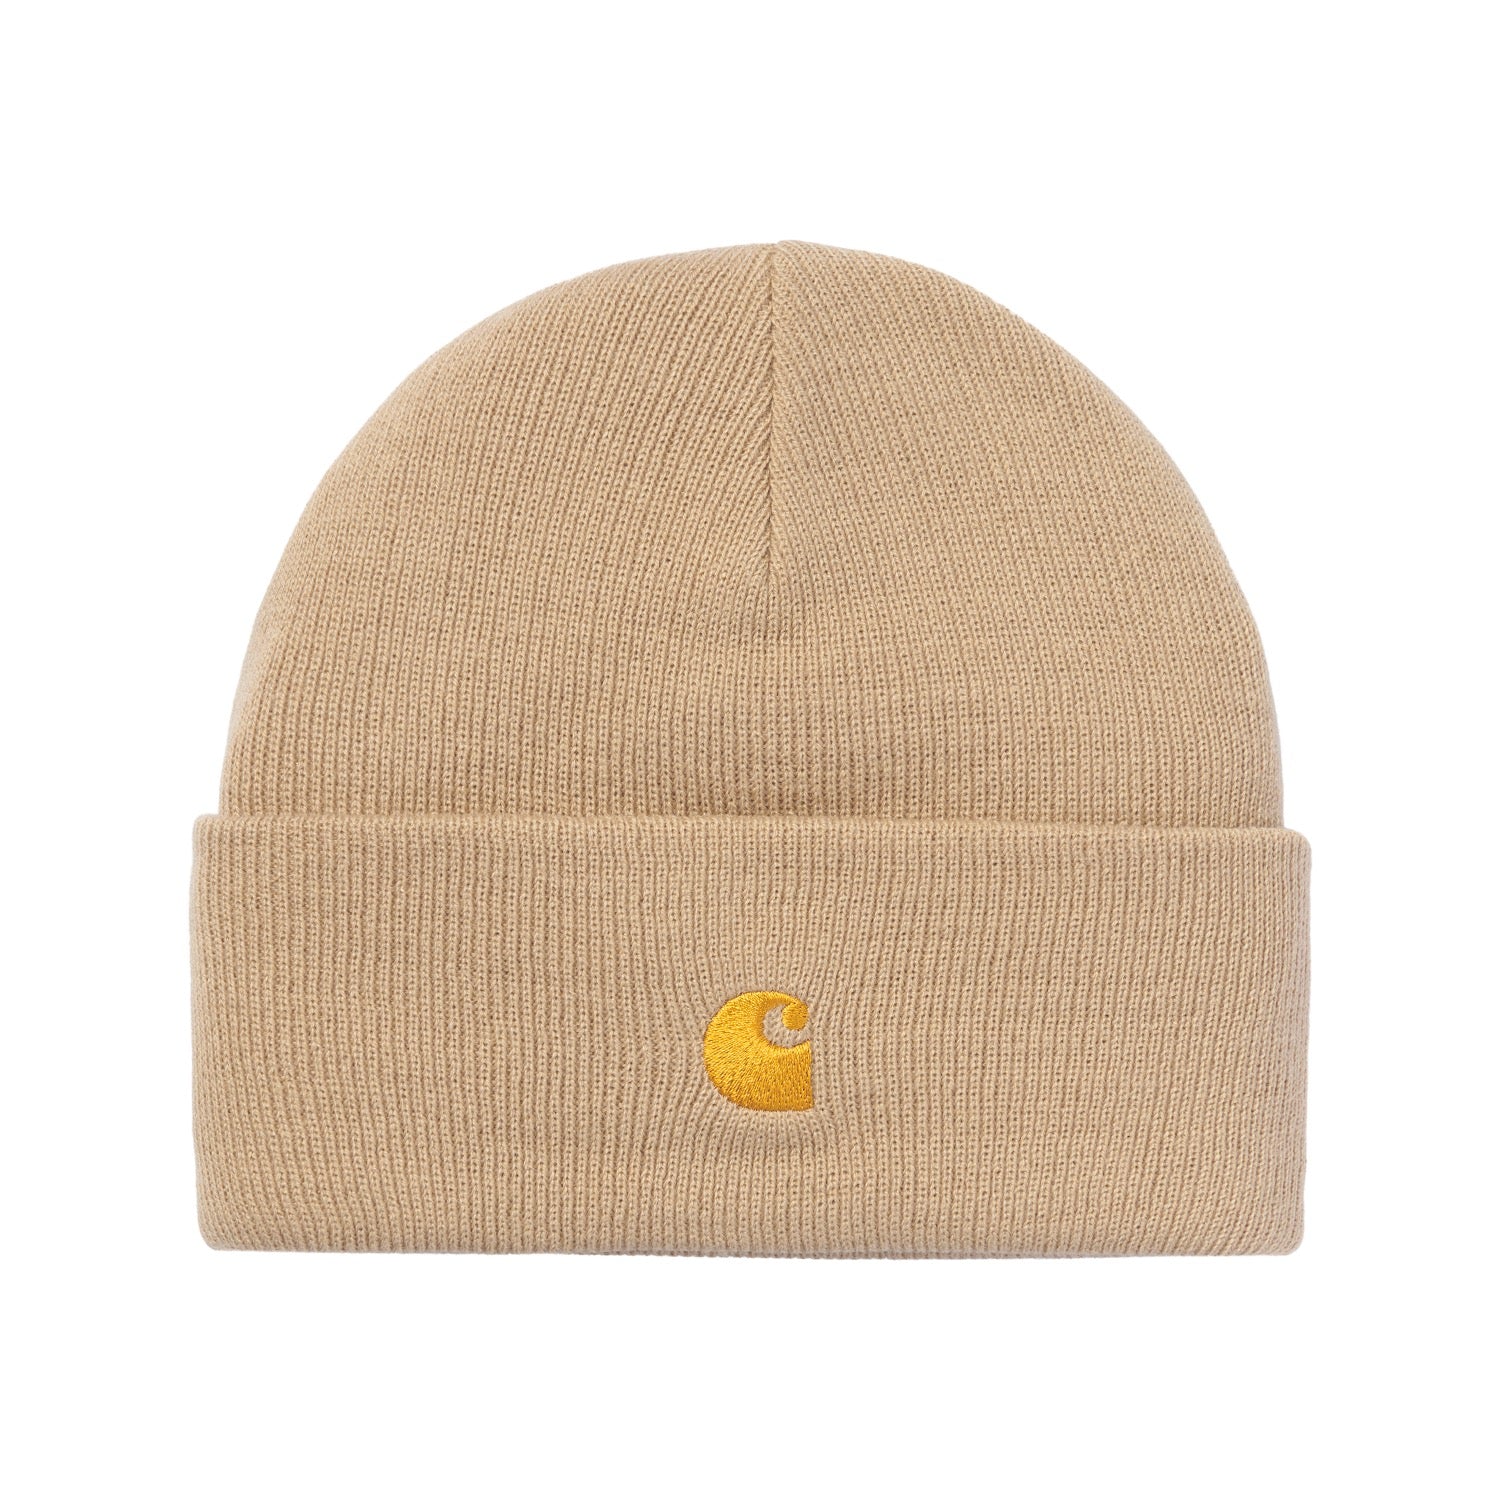 CHASE BEANIE - Sable / Gold